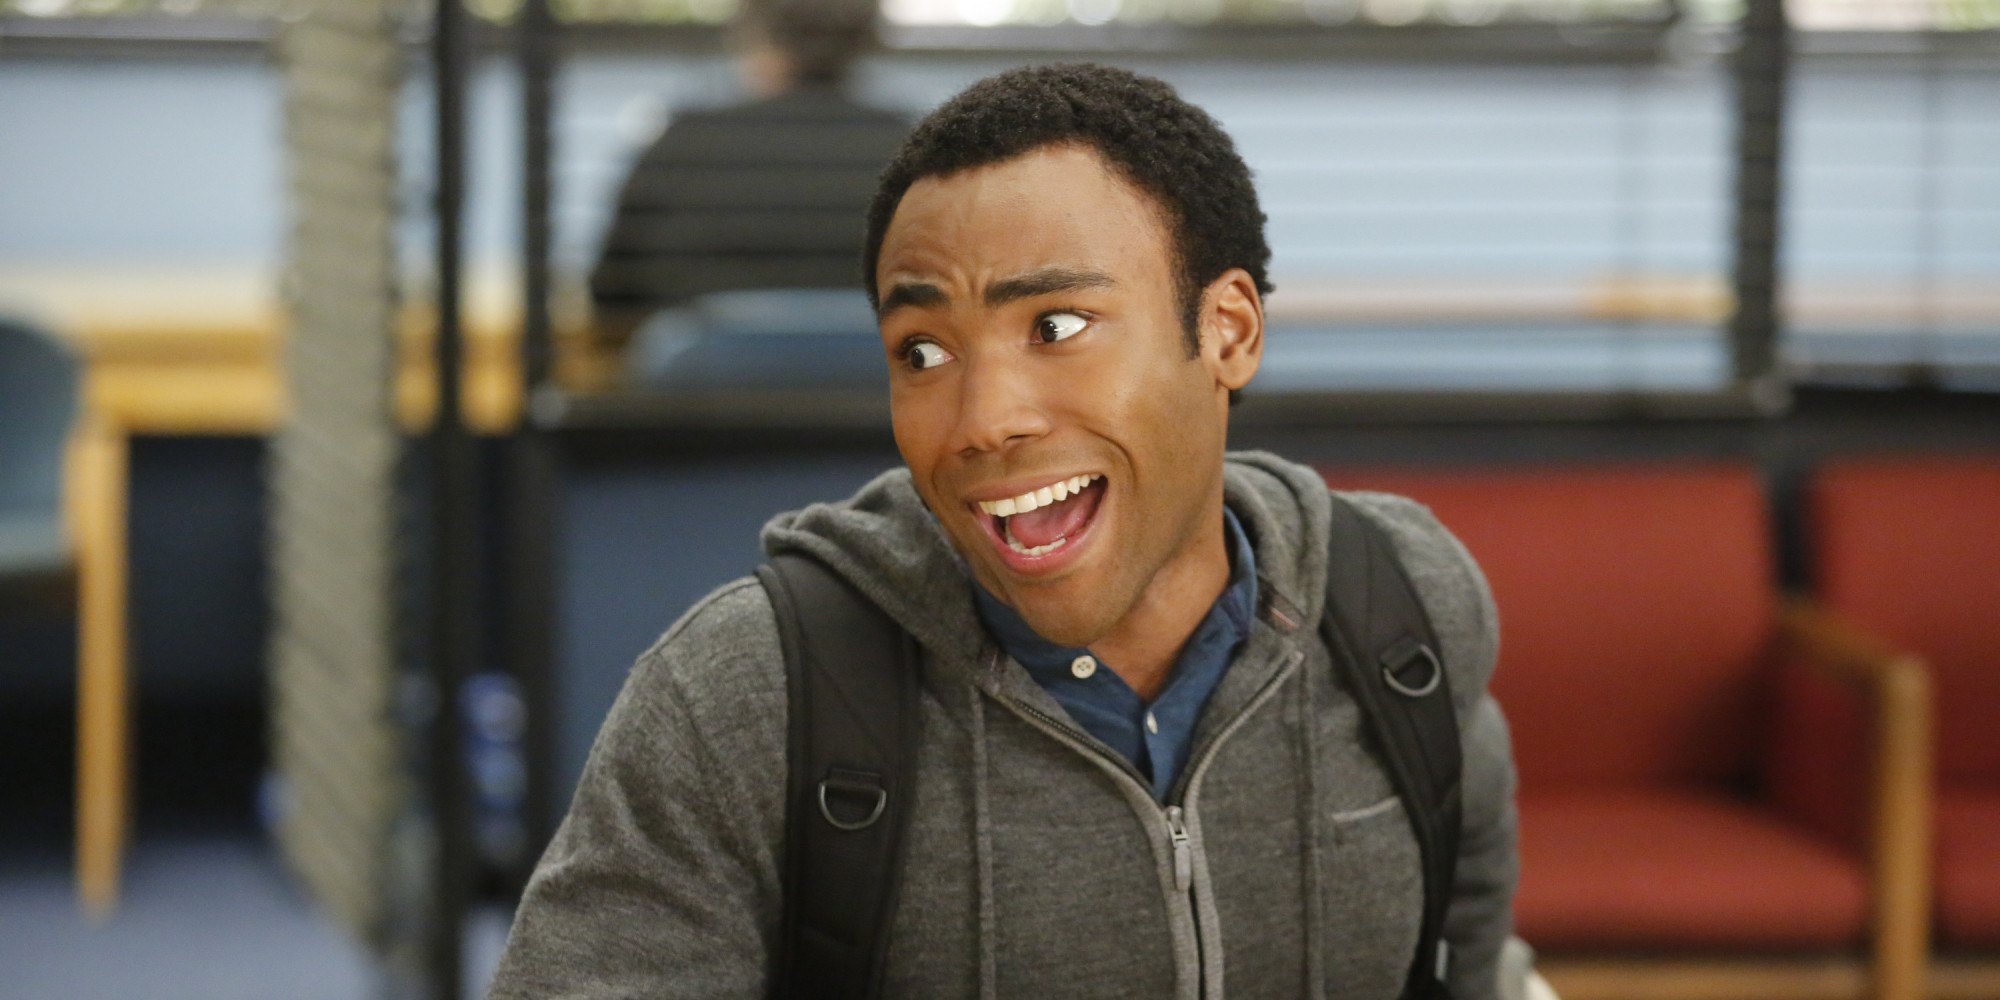 Donald Glover as Troy Barnes making a face and looking to the side